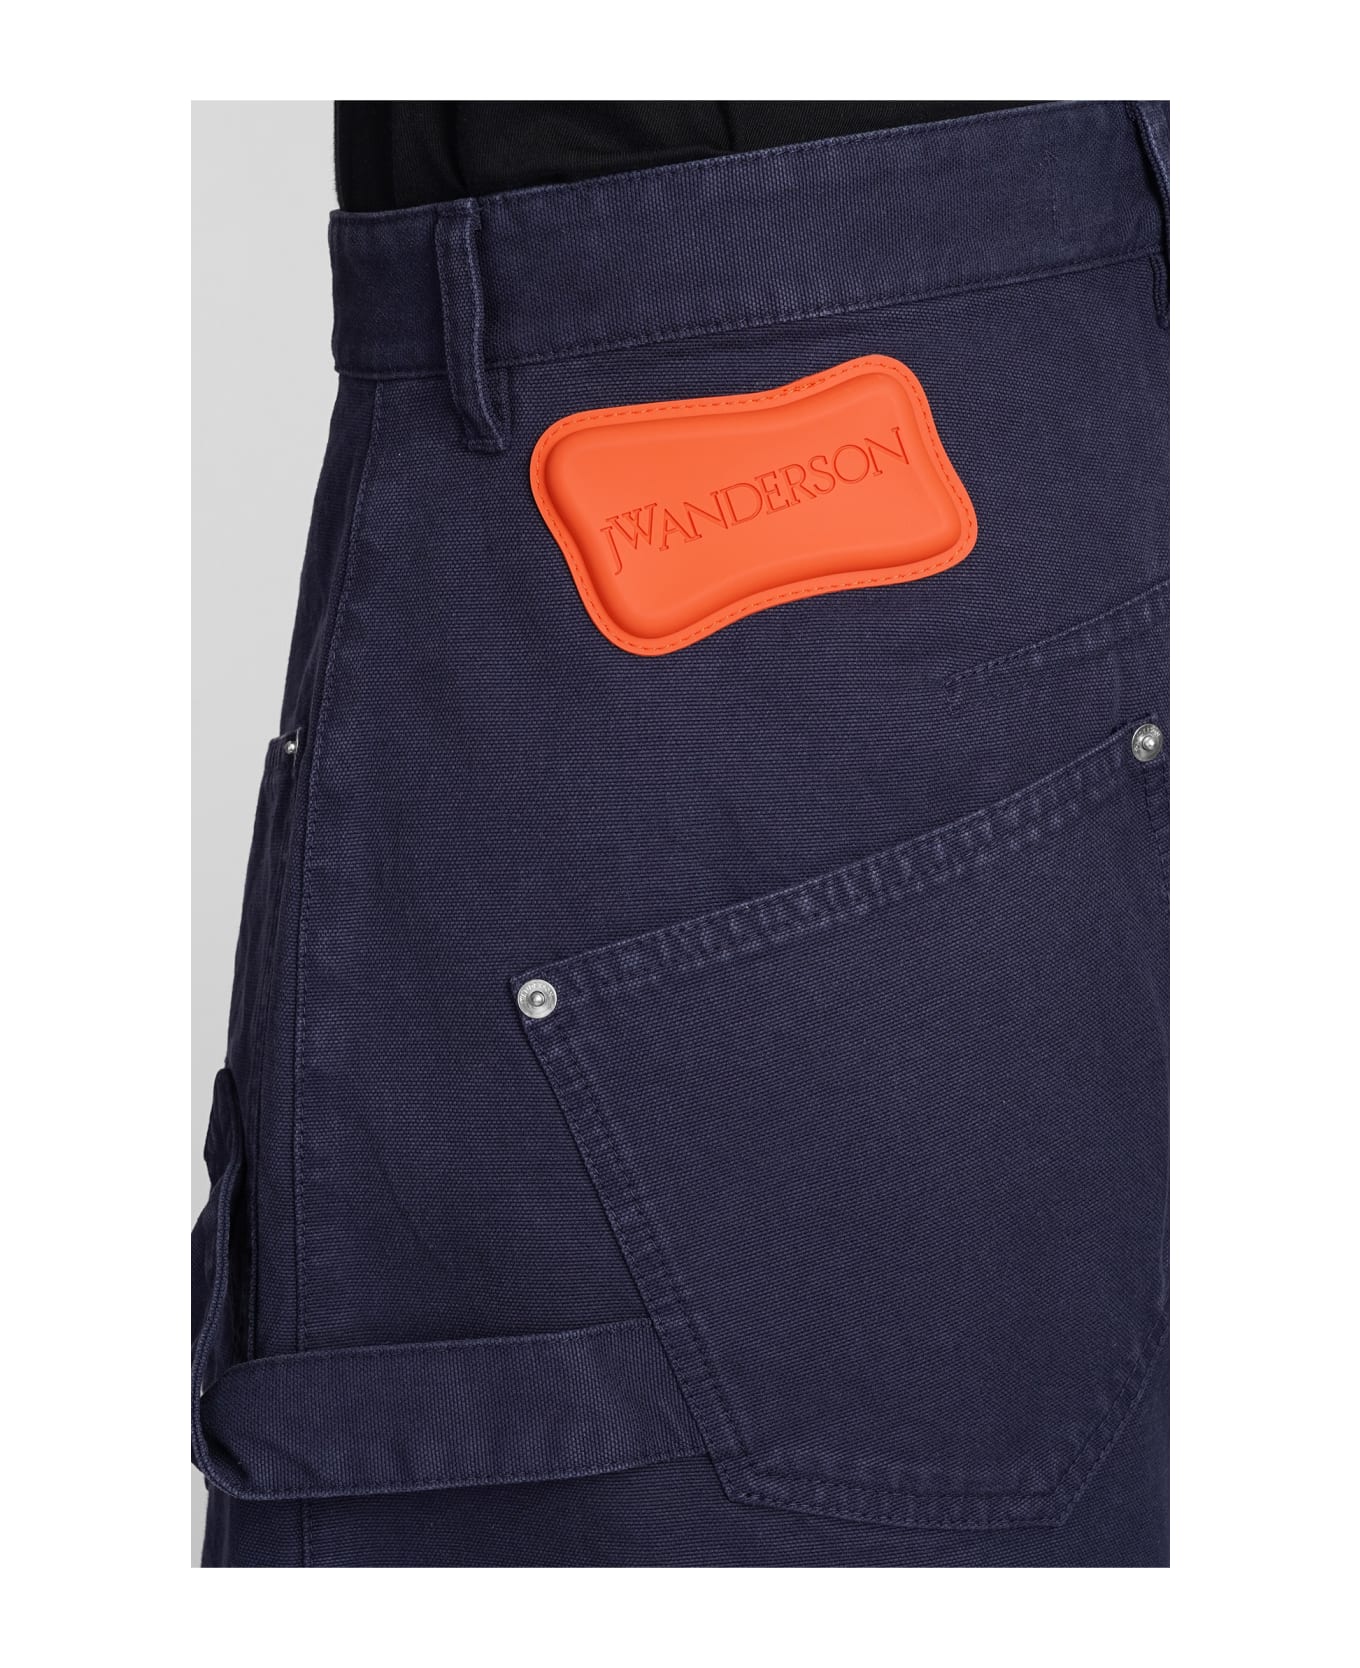 J.W. Anderson Twisted Shorts - Navy